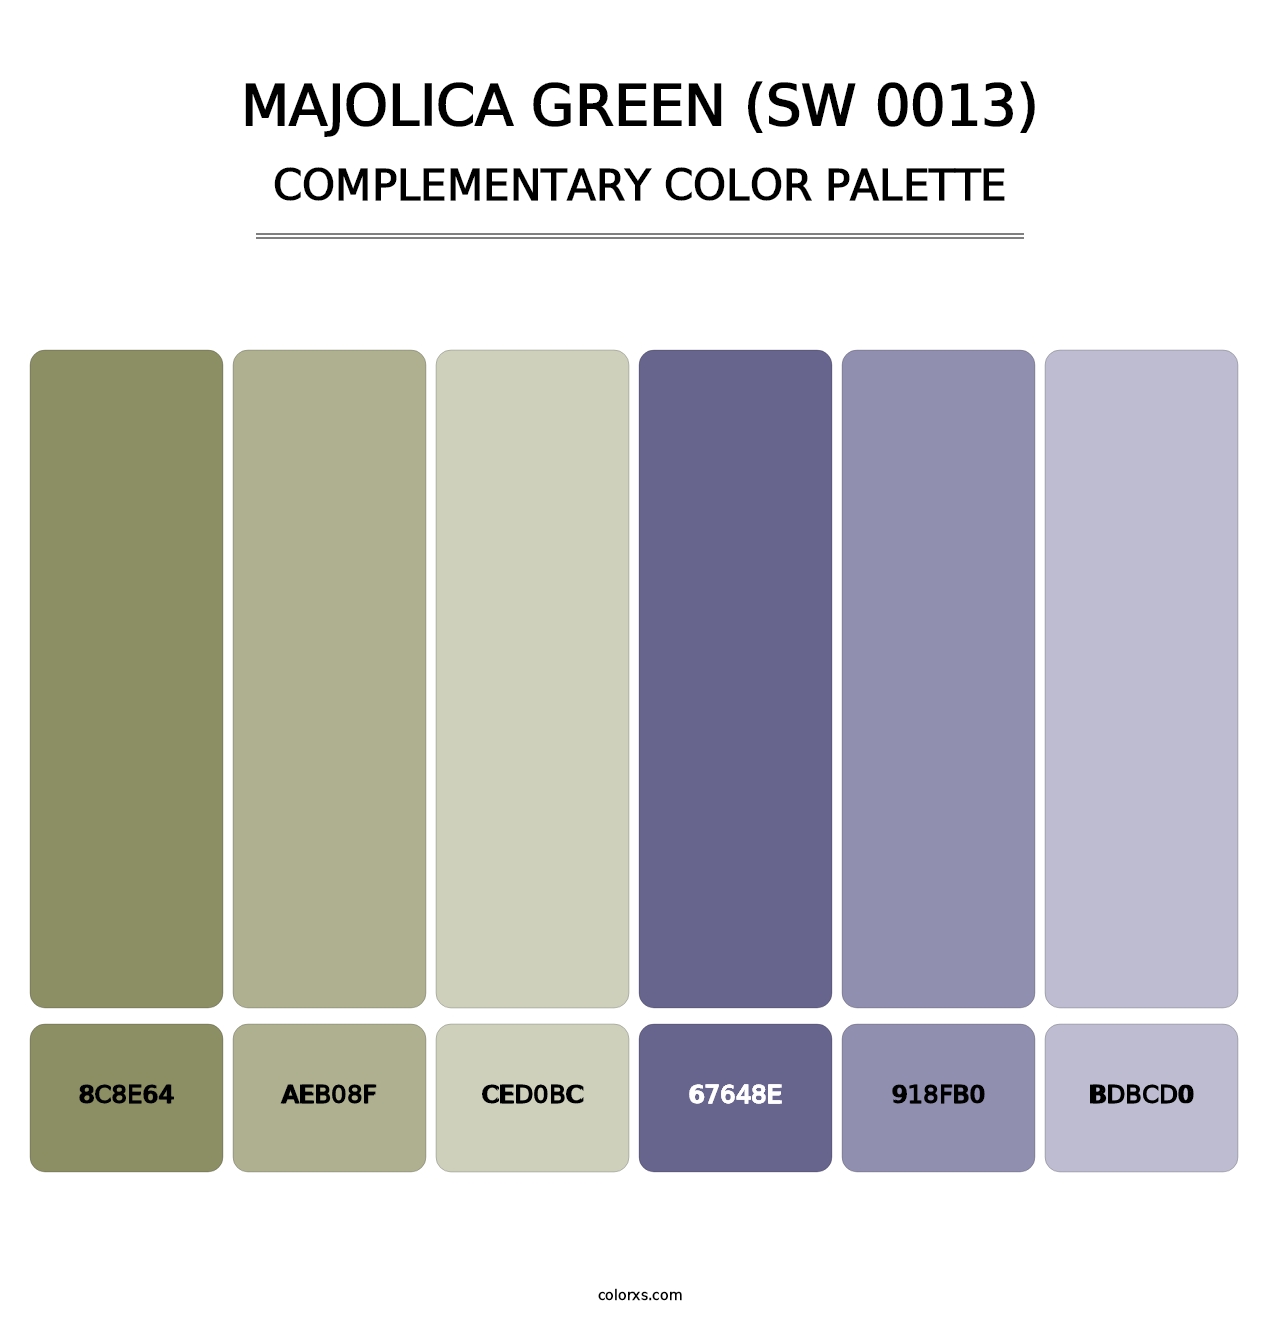 Majolica Green (SW 0013) - Complementary Color Palette